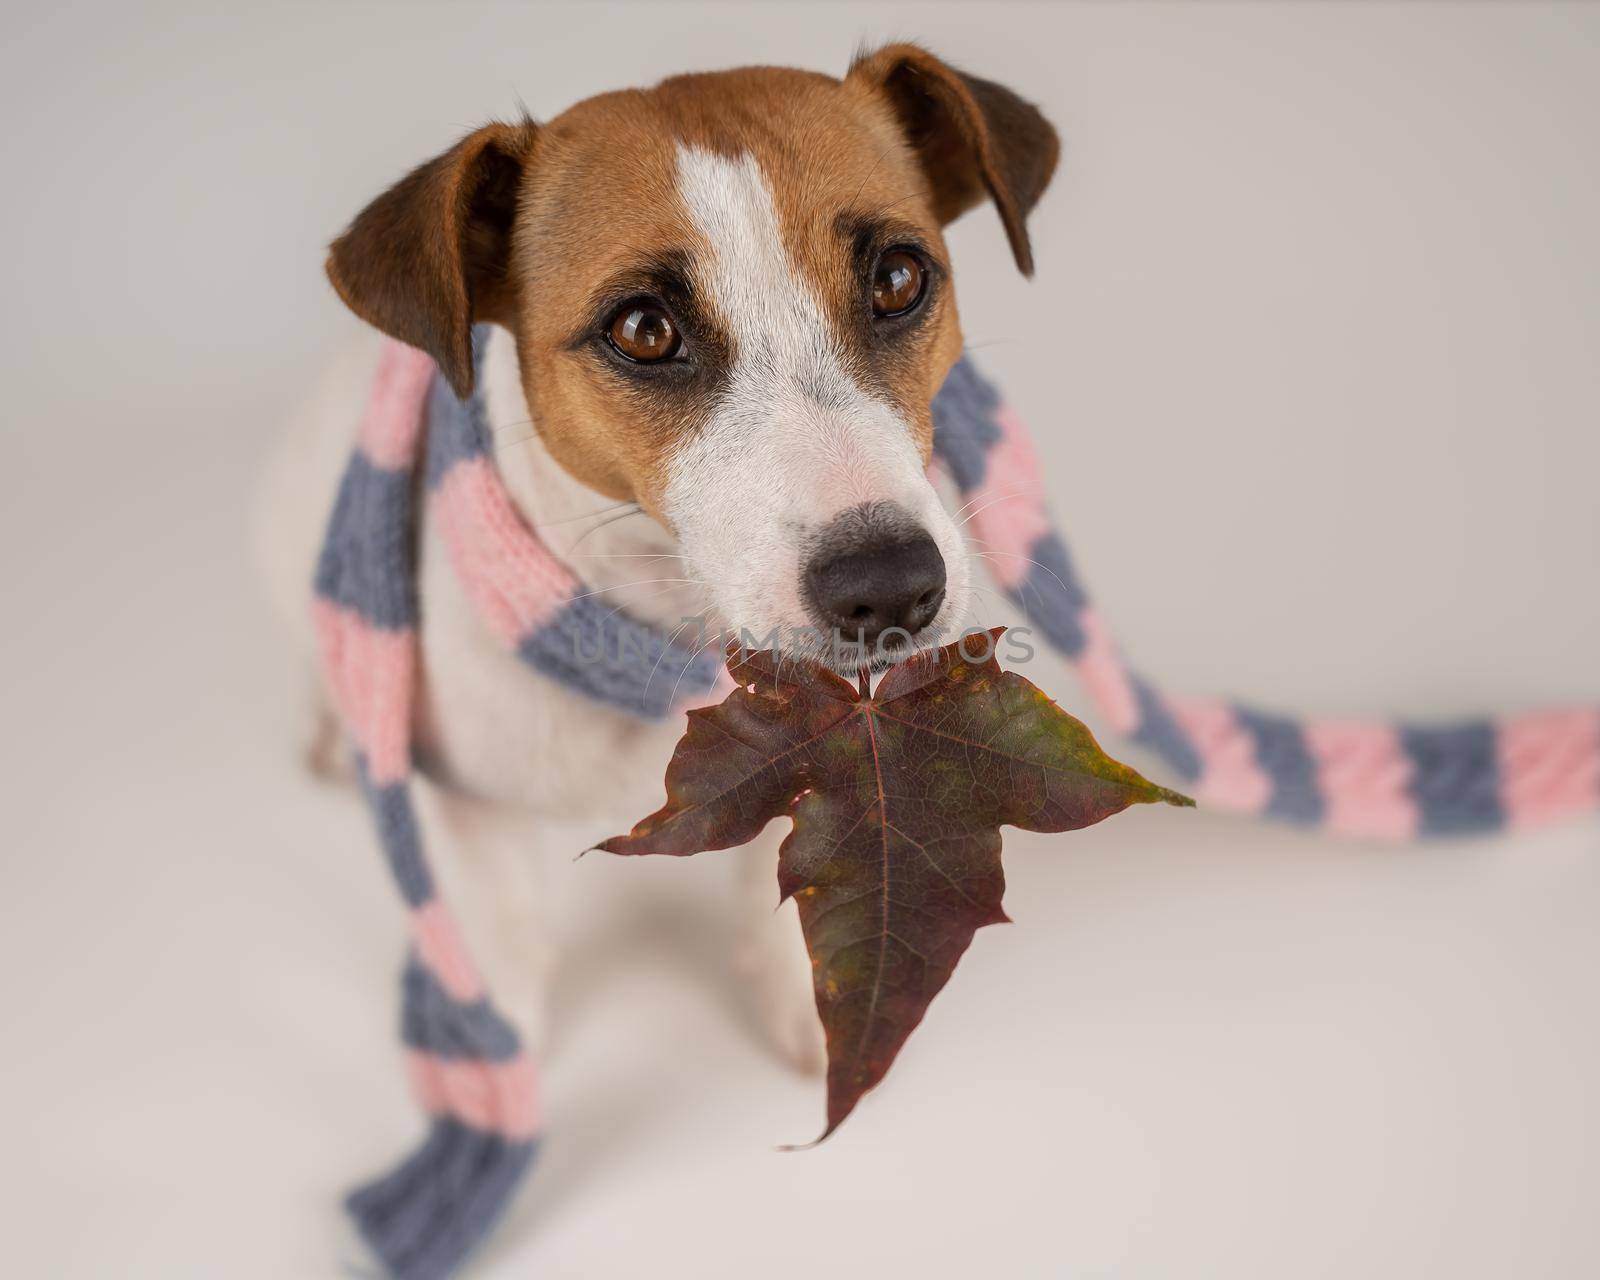 Dog Jack Russell Terrier wearing a knit scarf holding a maple leaf on a white background. by mrwed54